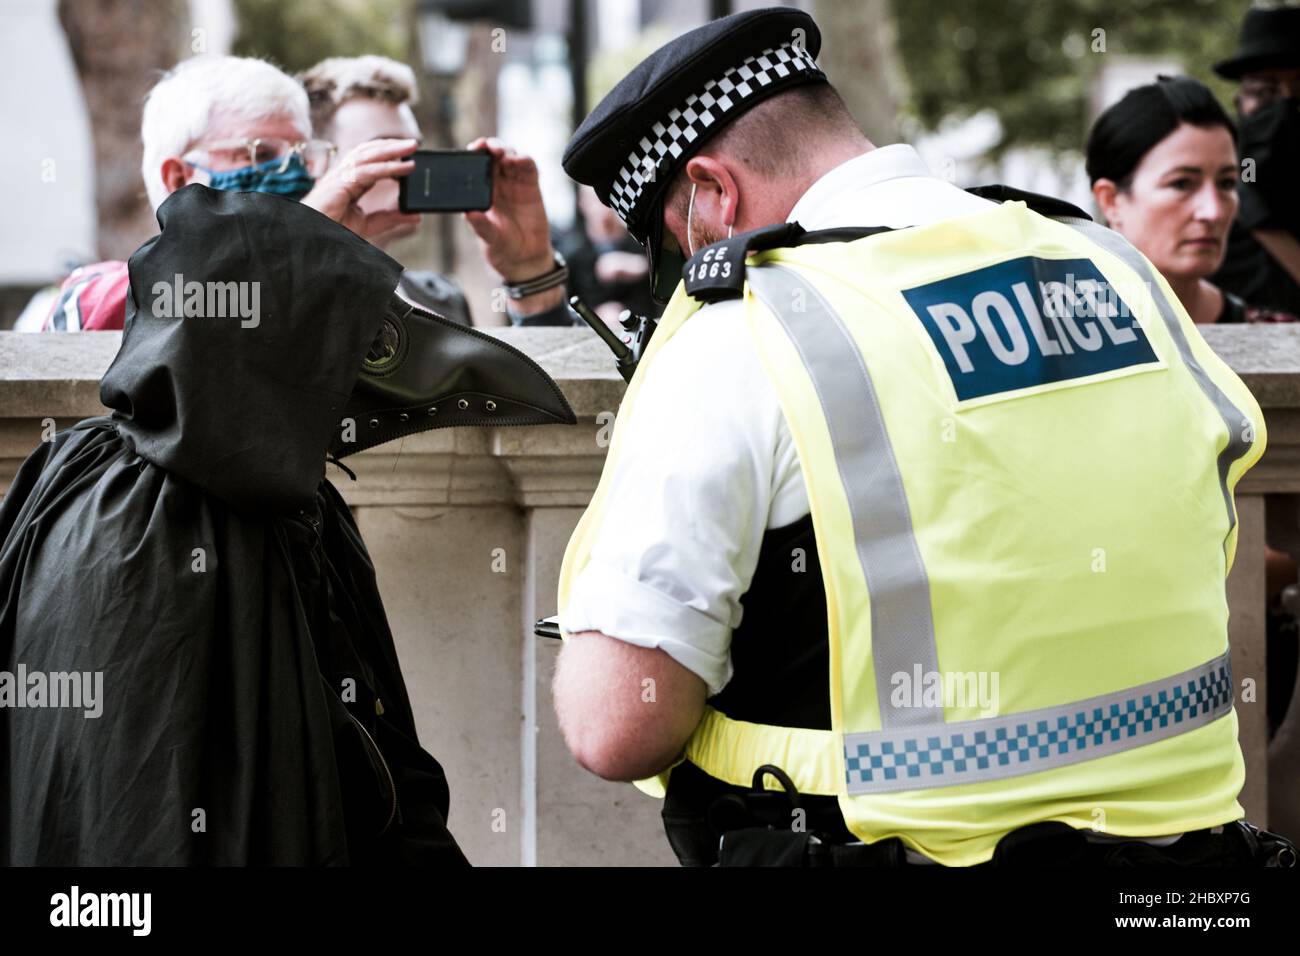 police search animal rebellion activist dressed as plague doctor near Downing Street London 2020 Stock Photo